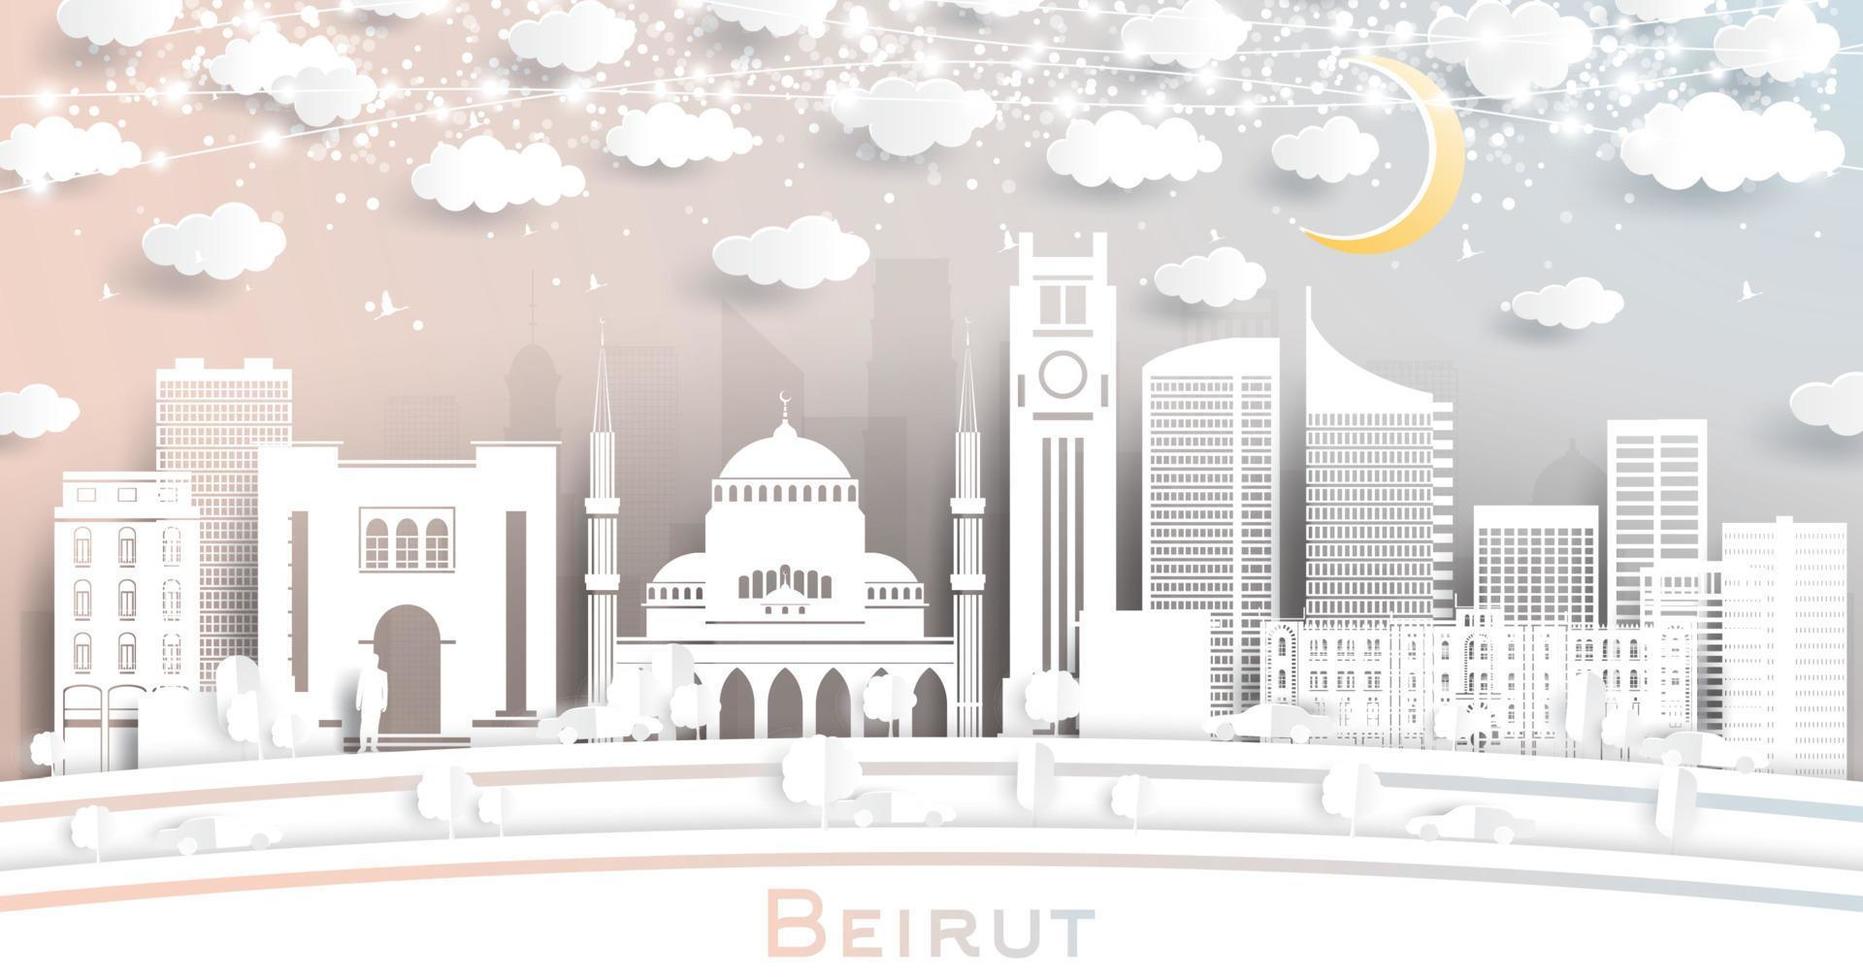 Beirut Lebanon City Skyline in Paper Cut Style with White Buildings, Moon and Neon Garland. vector